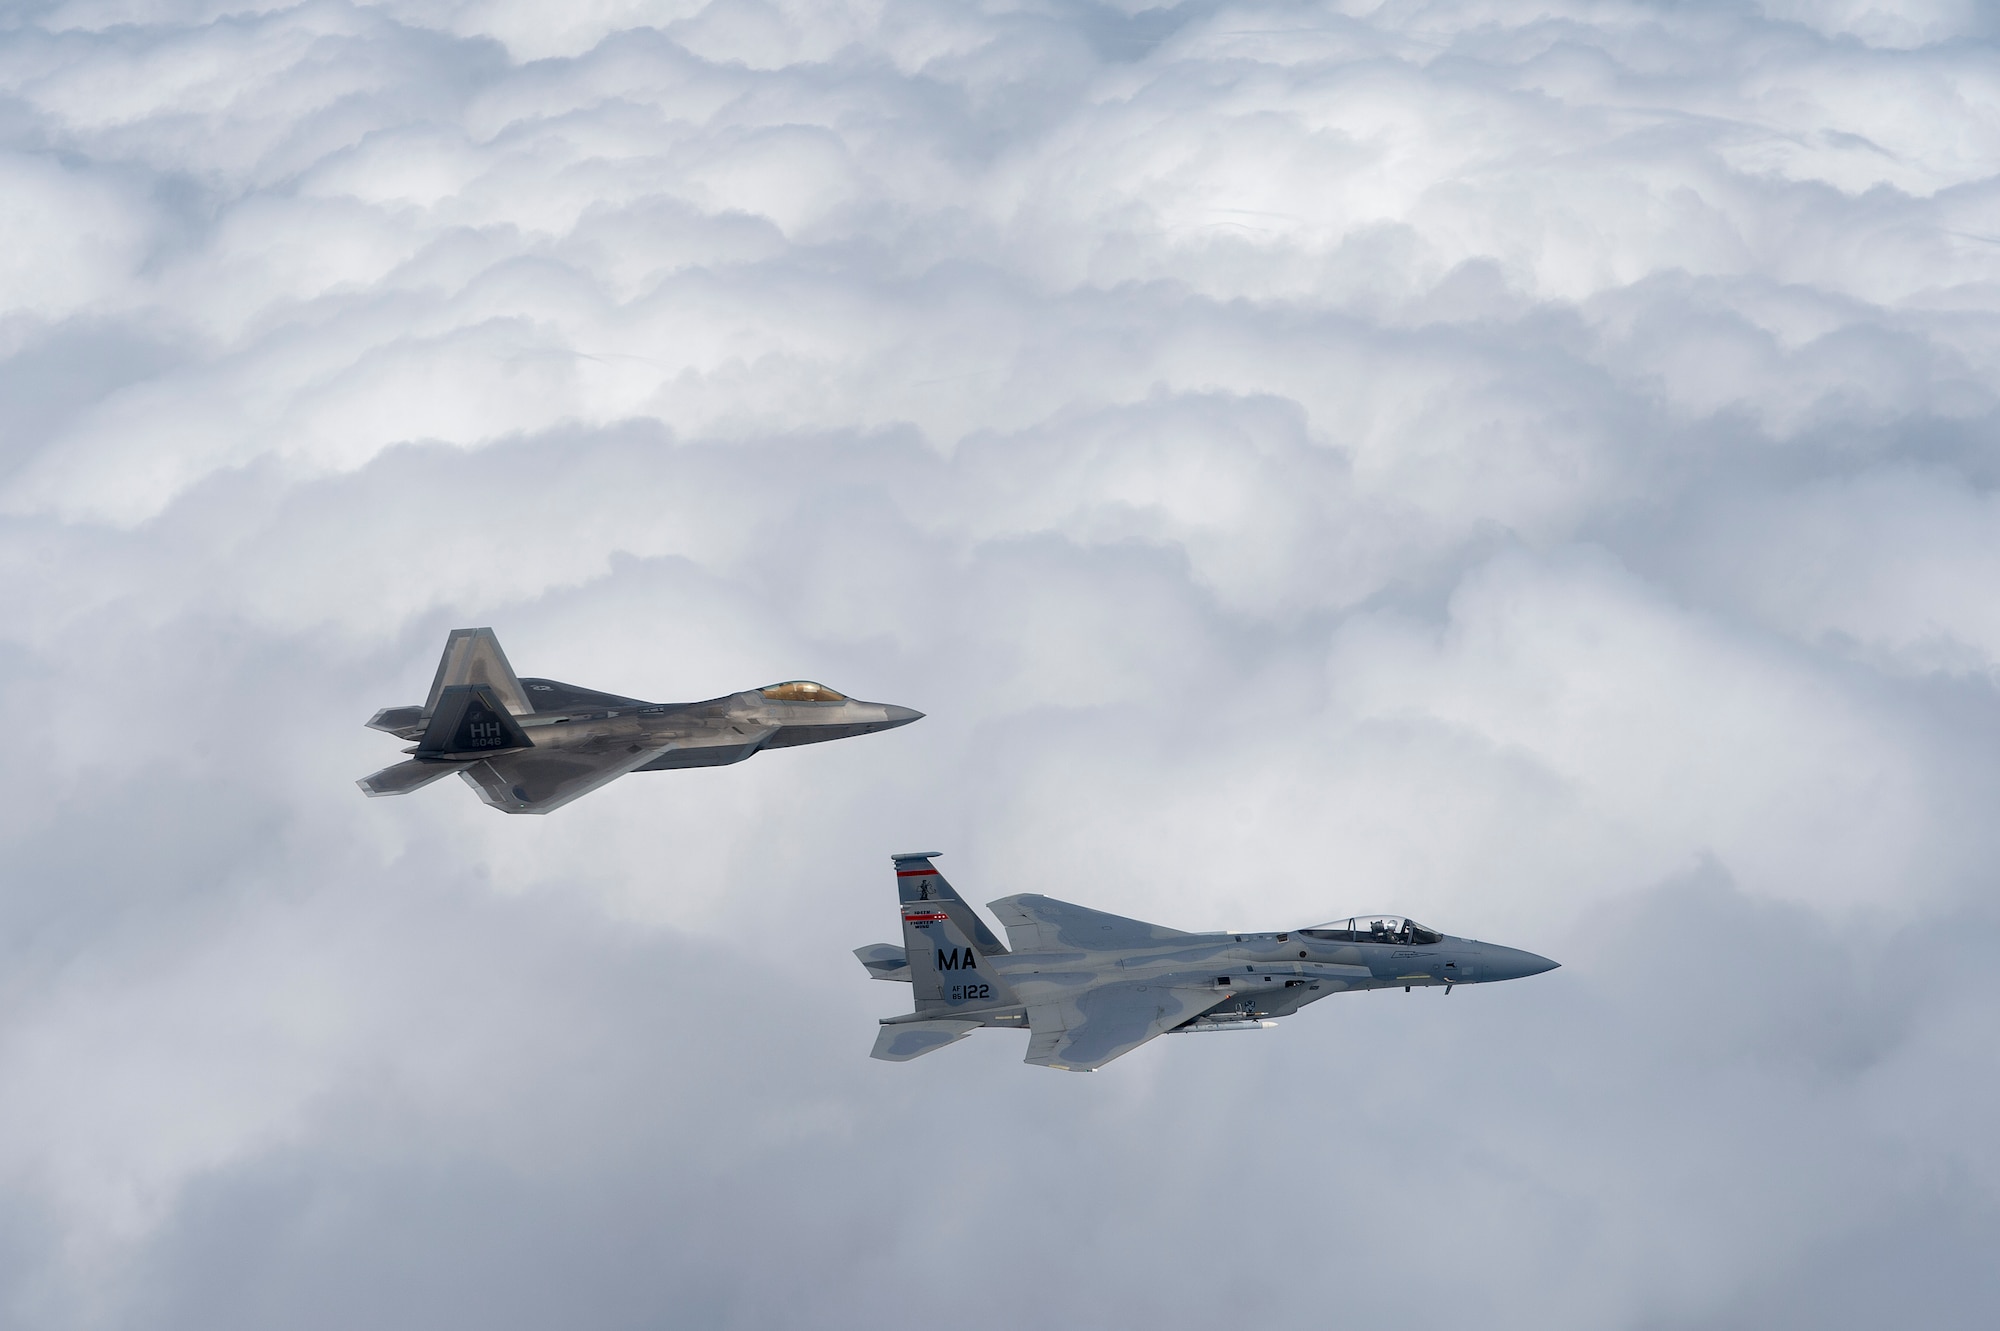 A U.S. Air Force F-22 Raptor from the 154th Wing, Joint Base Pearl Harbor-Hickam, Hawaii, and U.S. Air Force F-15 Eagle from the 131st Fighter Squadron, 104th Fighter Wing, Barnes Air National Guard Base, Mass., fly over Penang, Malaysia, during Cope Taufan 14, June 16, 2014. Cope Taufan is a biennial large force employment exercise taking place June 9 to 20 designed to improve U.S. and Malaysian combined readiness. (U.S. Air Force photo by Tech. Sgt. Jason Robertson/Released) 